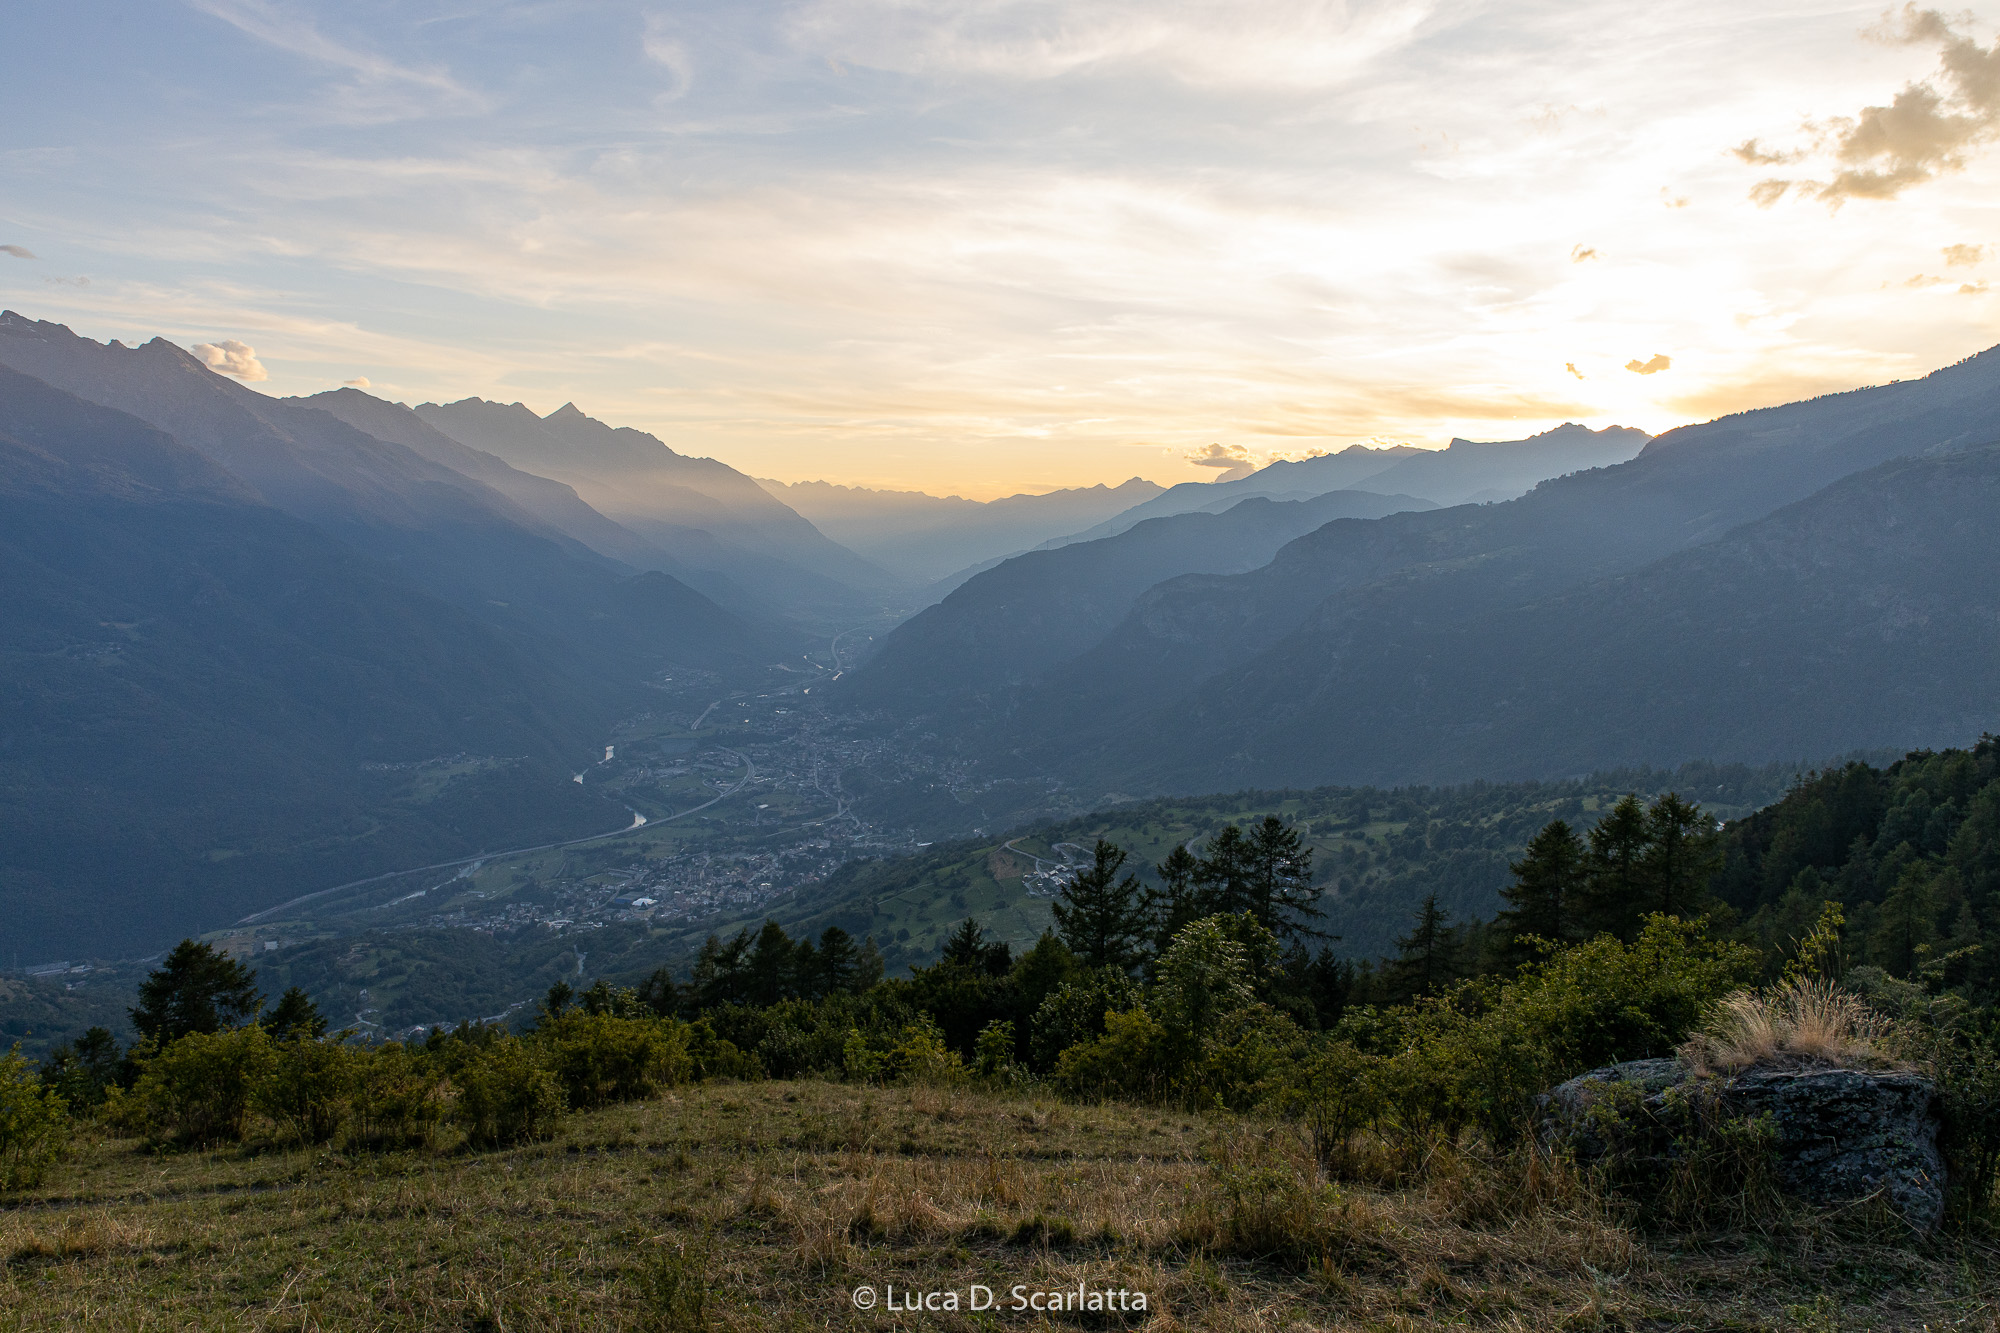 Central Aosta Valley from the Col de Joux...